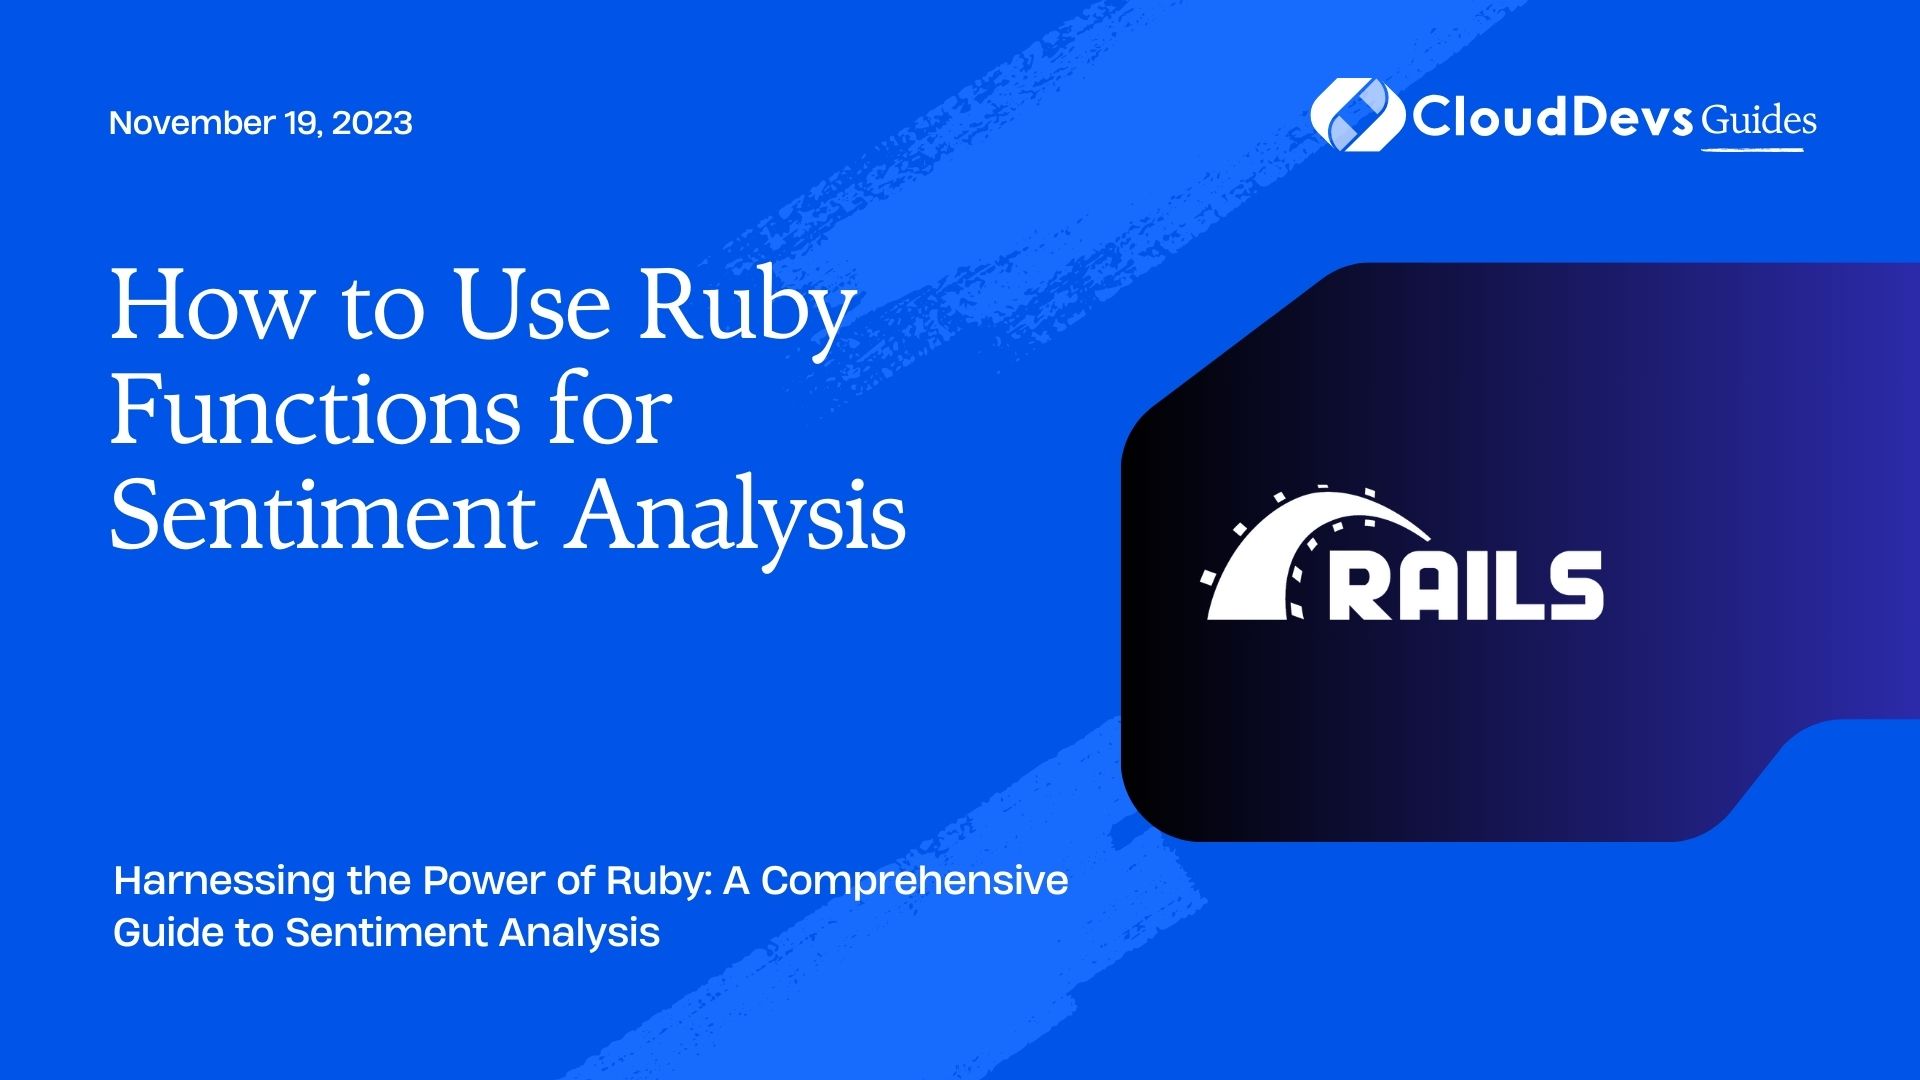 How to Use Ruby Functions for Sentiment Analysis